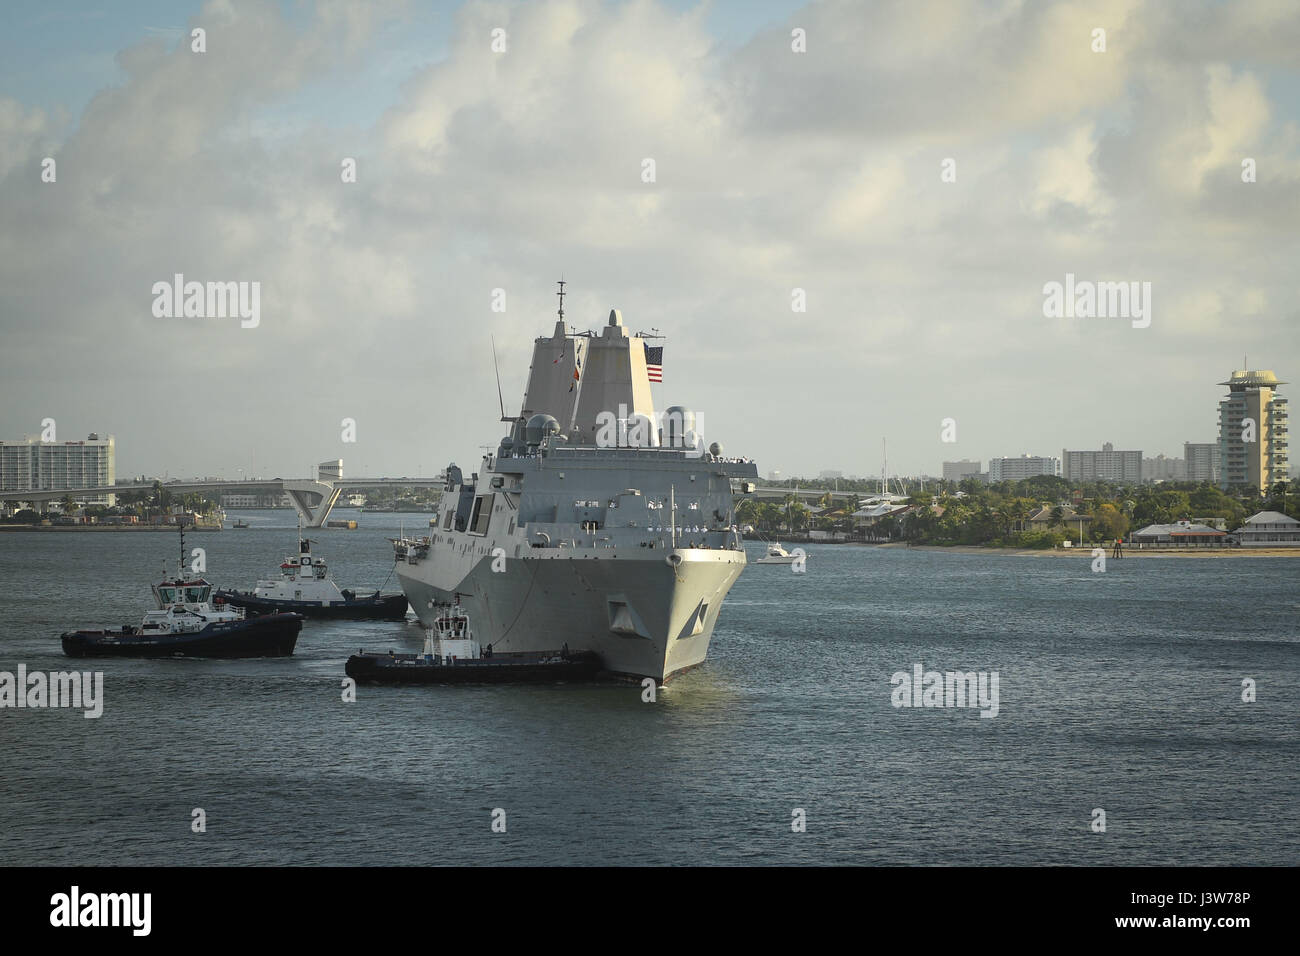 170501-N-ZN152-0025 PORT EVERGLADES, Fla. (May 1, 2017) The amphibious landing dock ship USS New York (LPD 21) arrives in Port Everglades, Florida to participate in the 27th annual Fleet Week Port Everglades. Fleet Week Port Everglades provides an opportunity for the citizens of South Florida to witness first-hand the latest capabilities of today’s maritime services, and gain a better understanding of how the sea services support the national defense of the United States. (U.S. Navy photo by Mass Communication Specialist 1st Class Ernest R. Scott/Released) Stock Photo